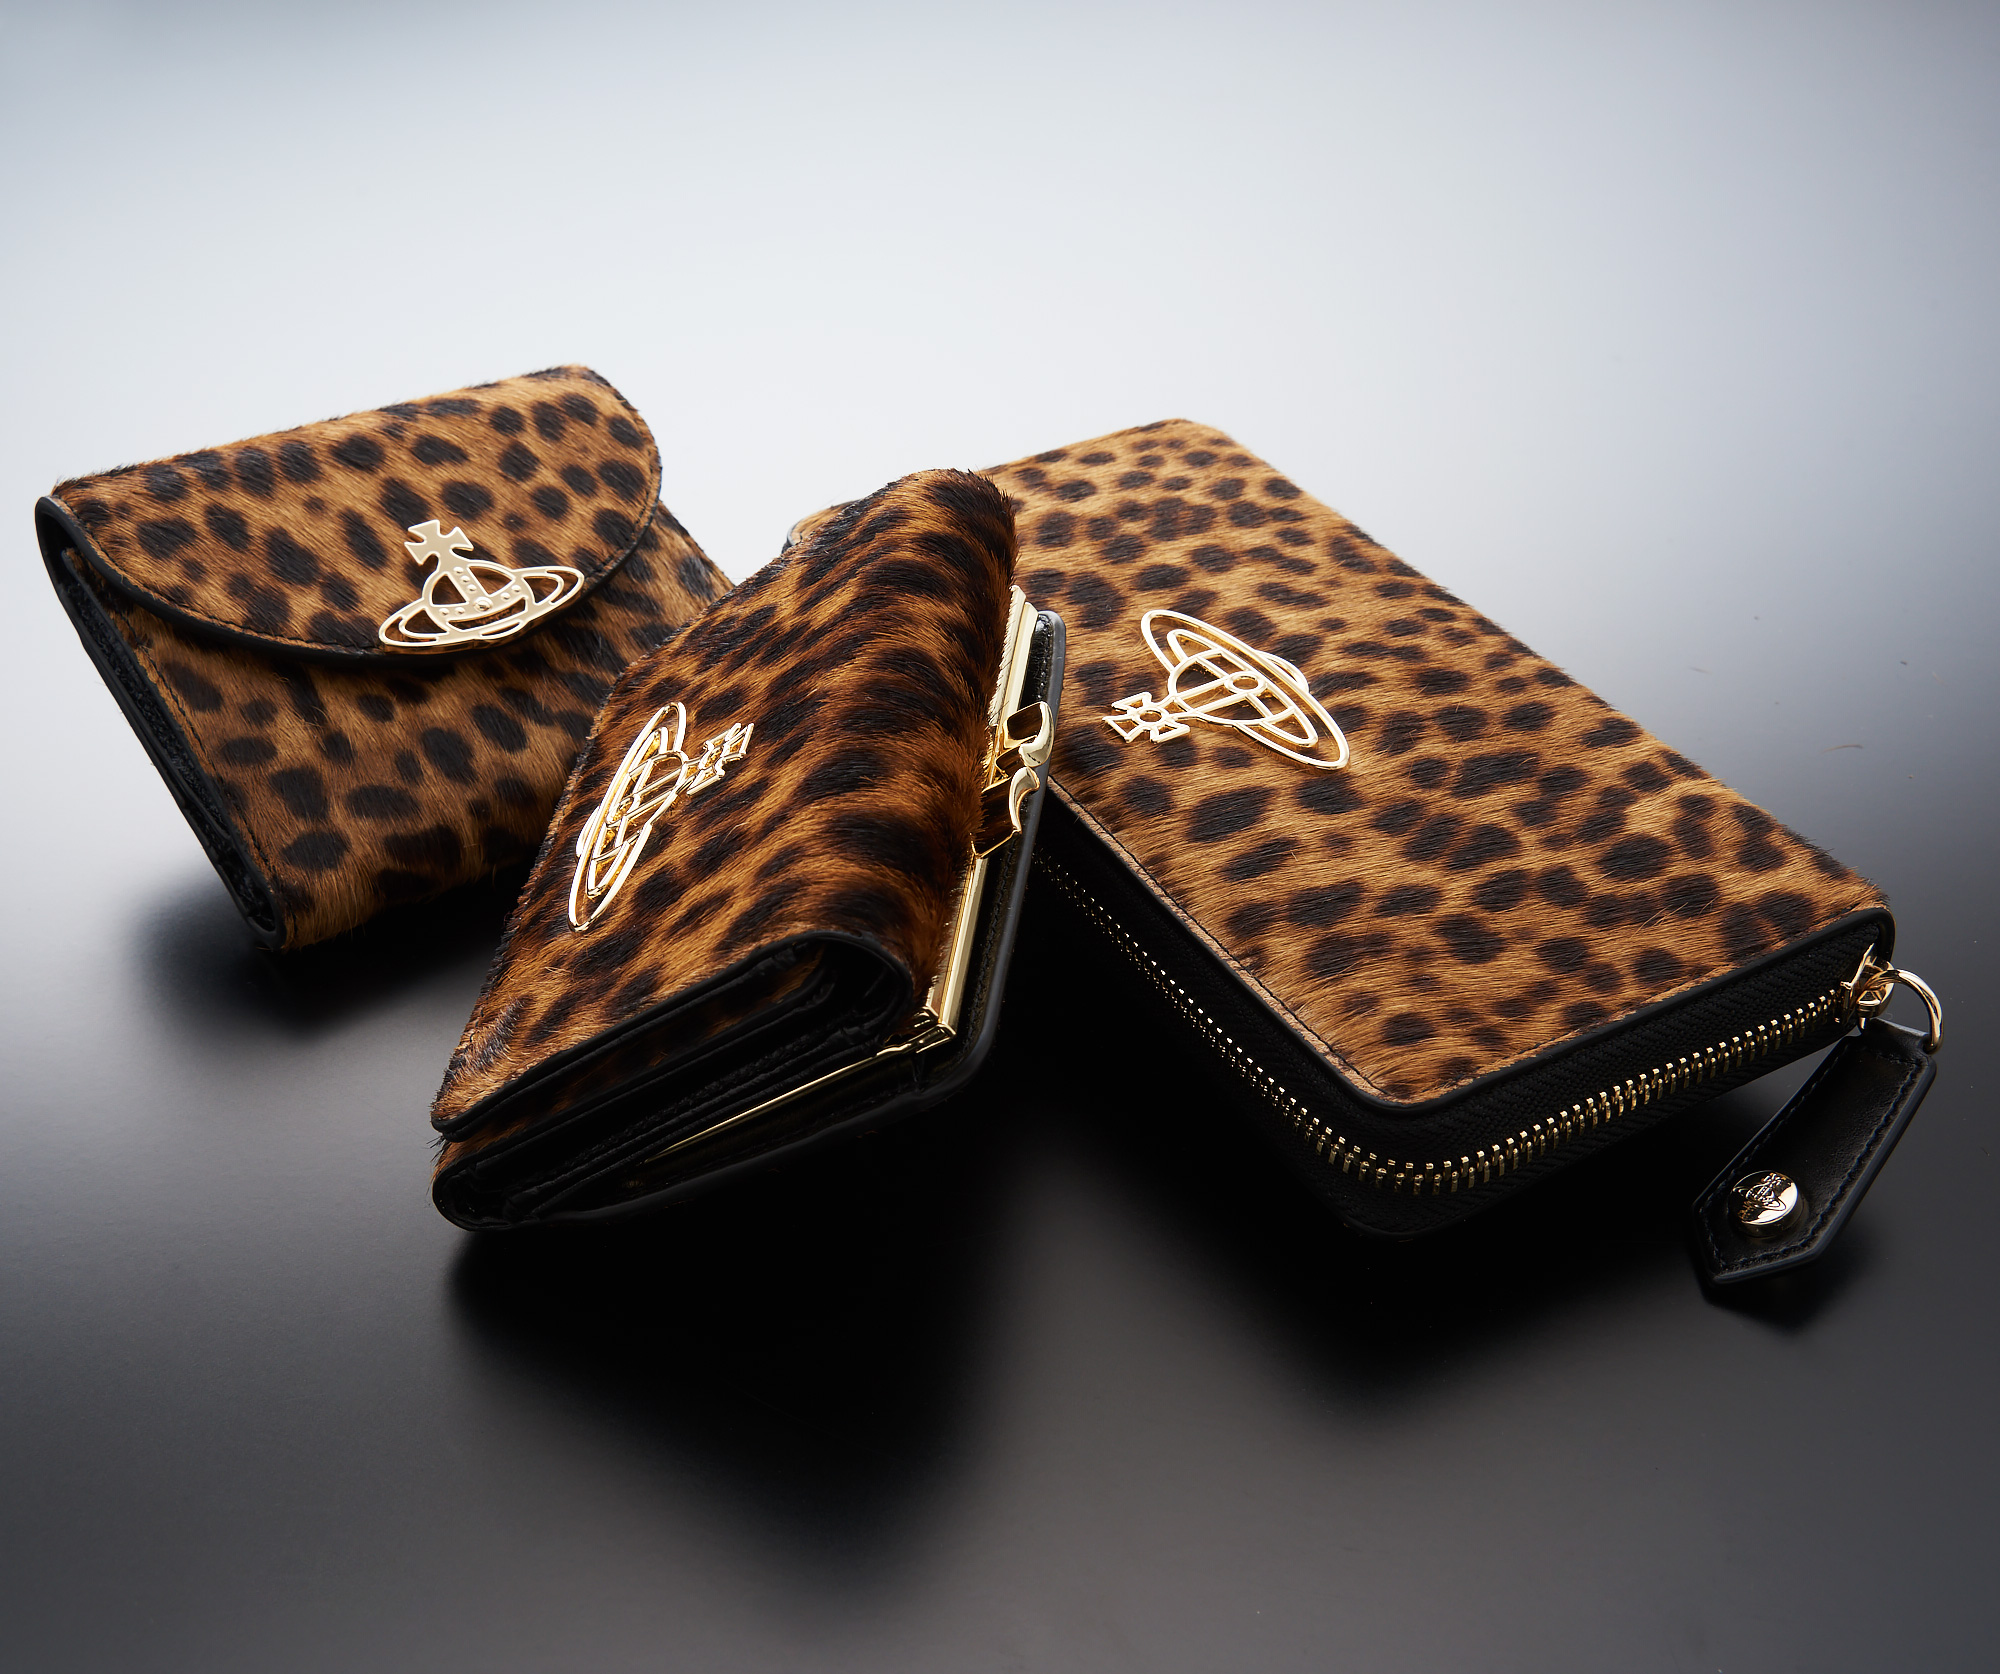 Vivienne Westwood “LEOPARD HAIRCALF Leather Goods” On Sale